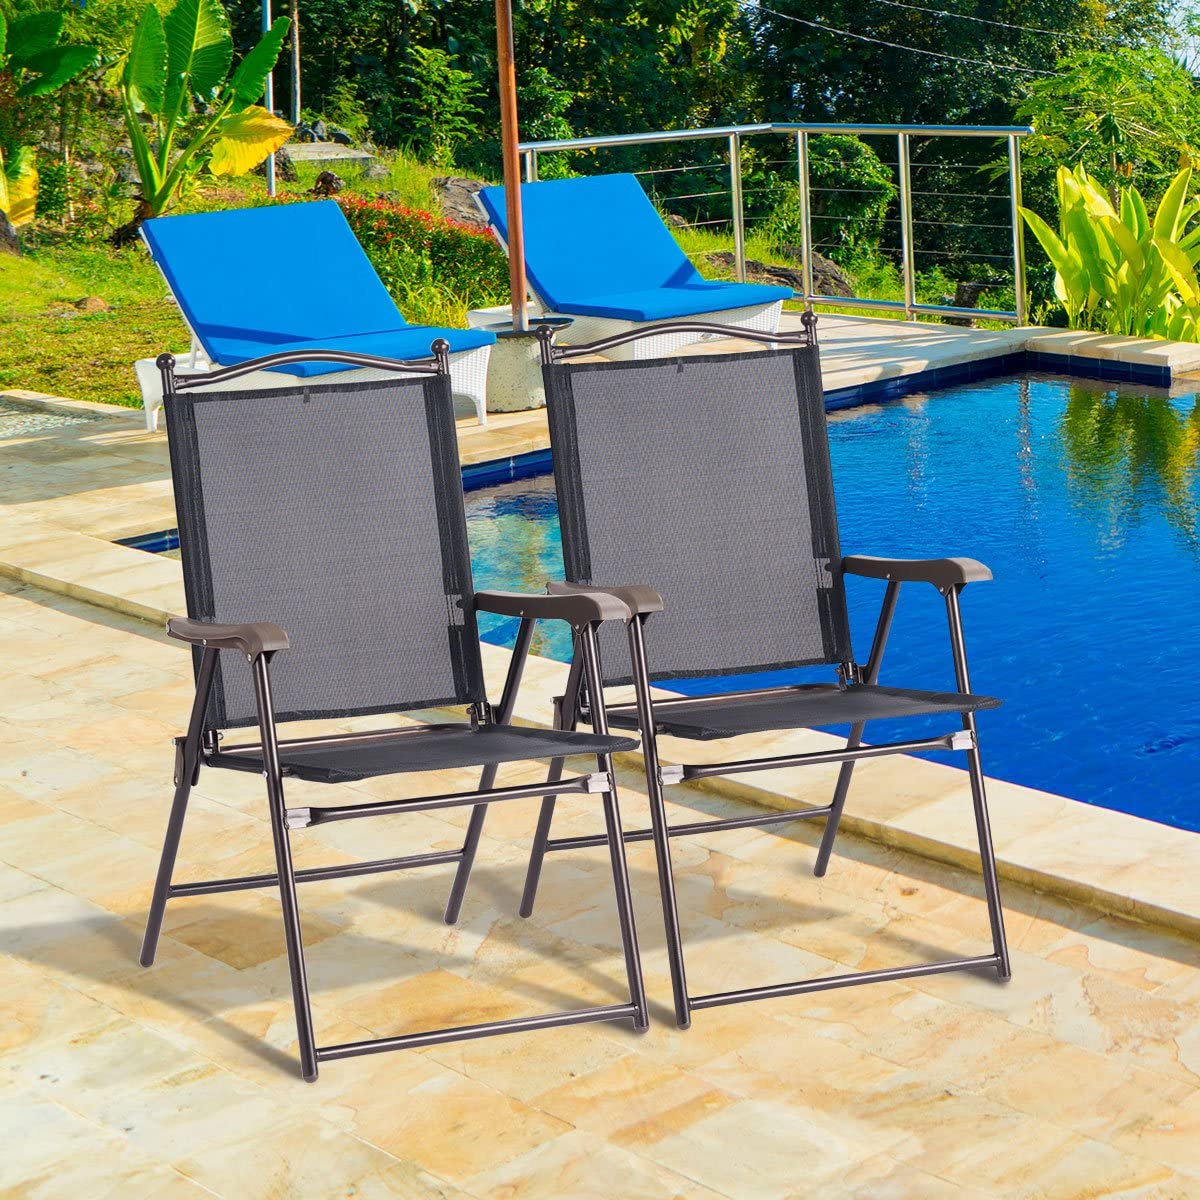 Set of 2 Patio Folding Chairs, Sling Chairs